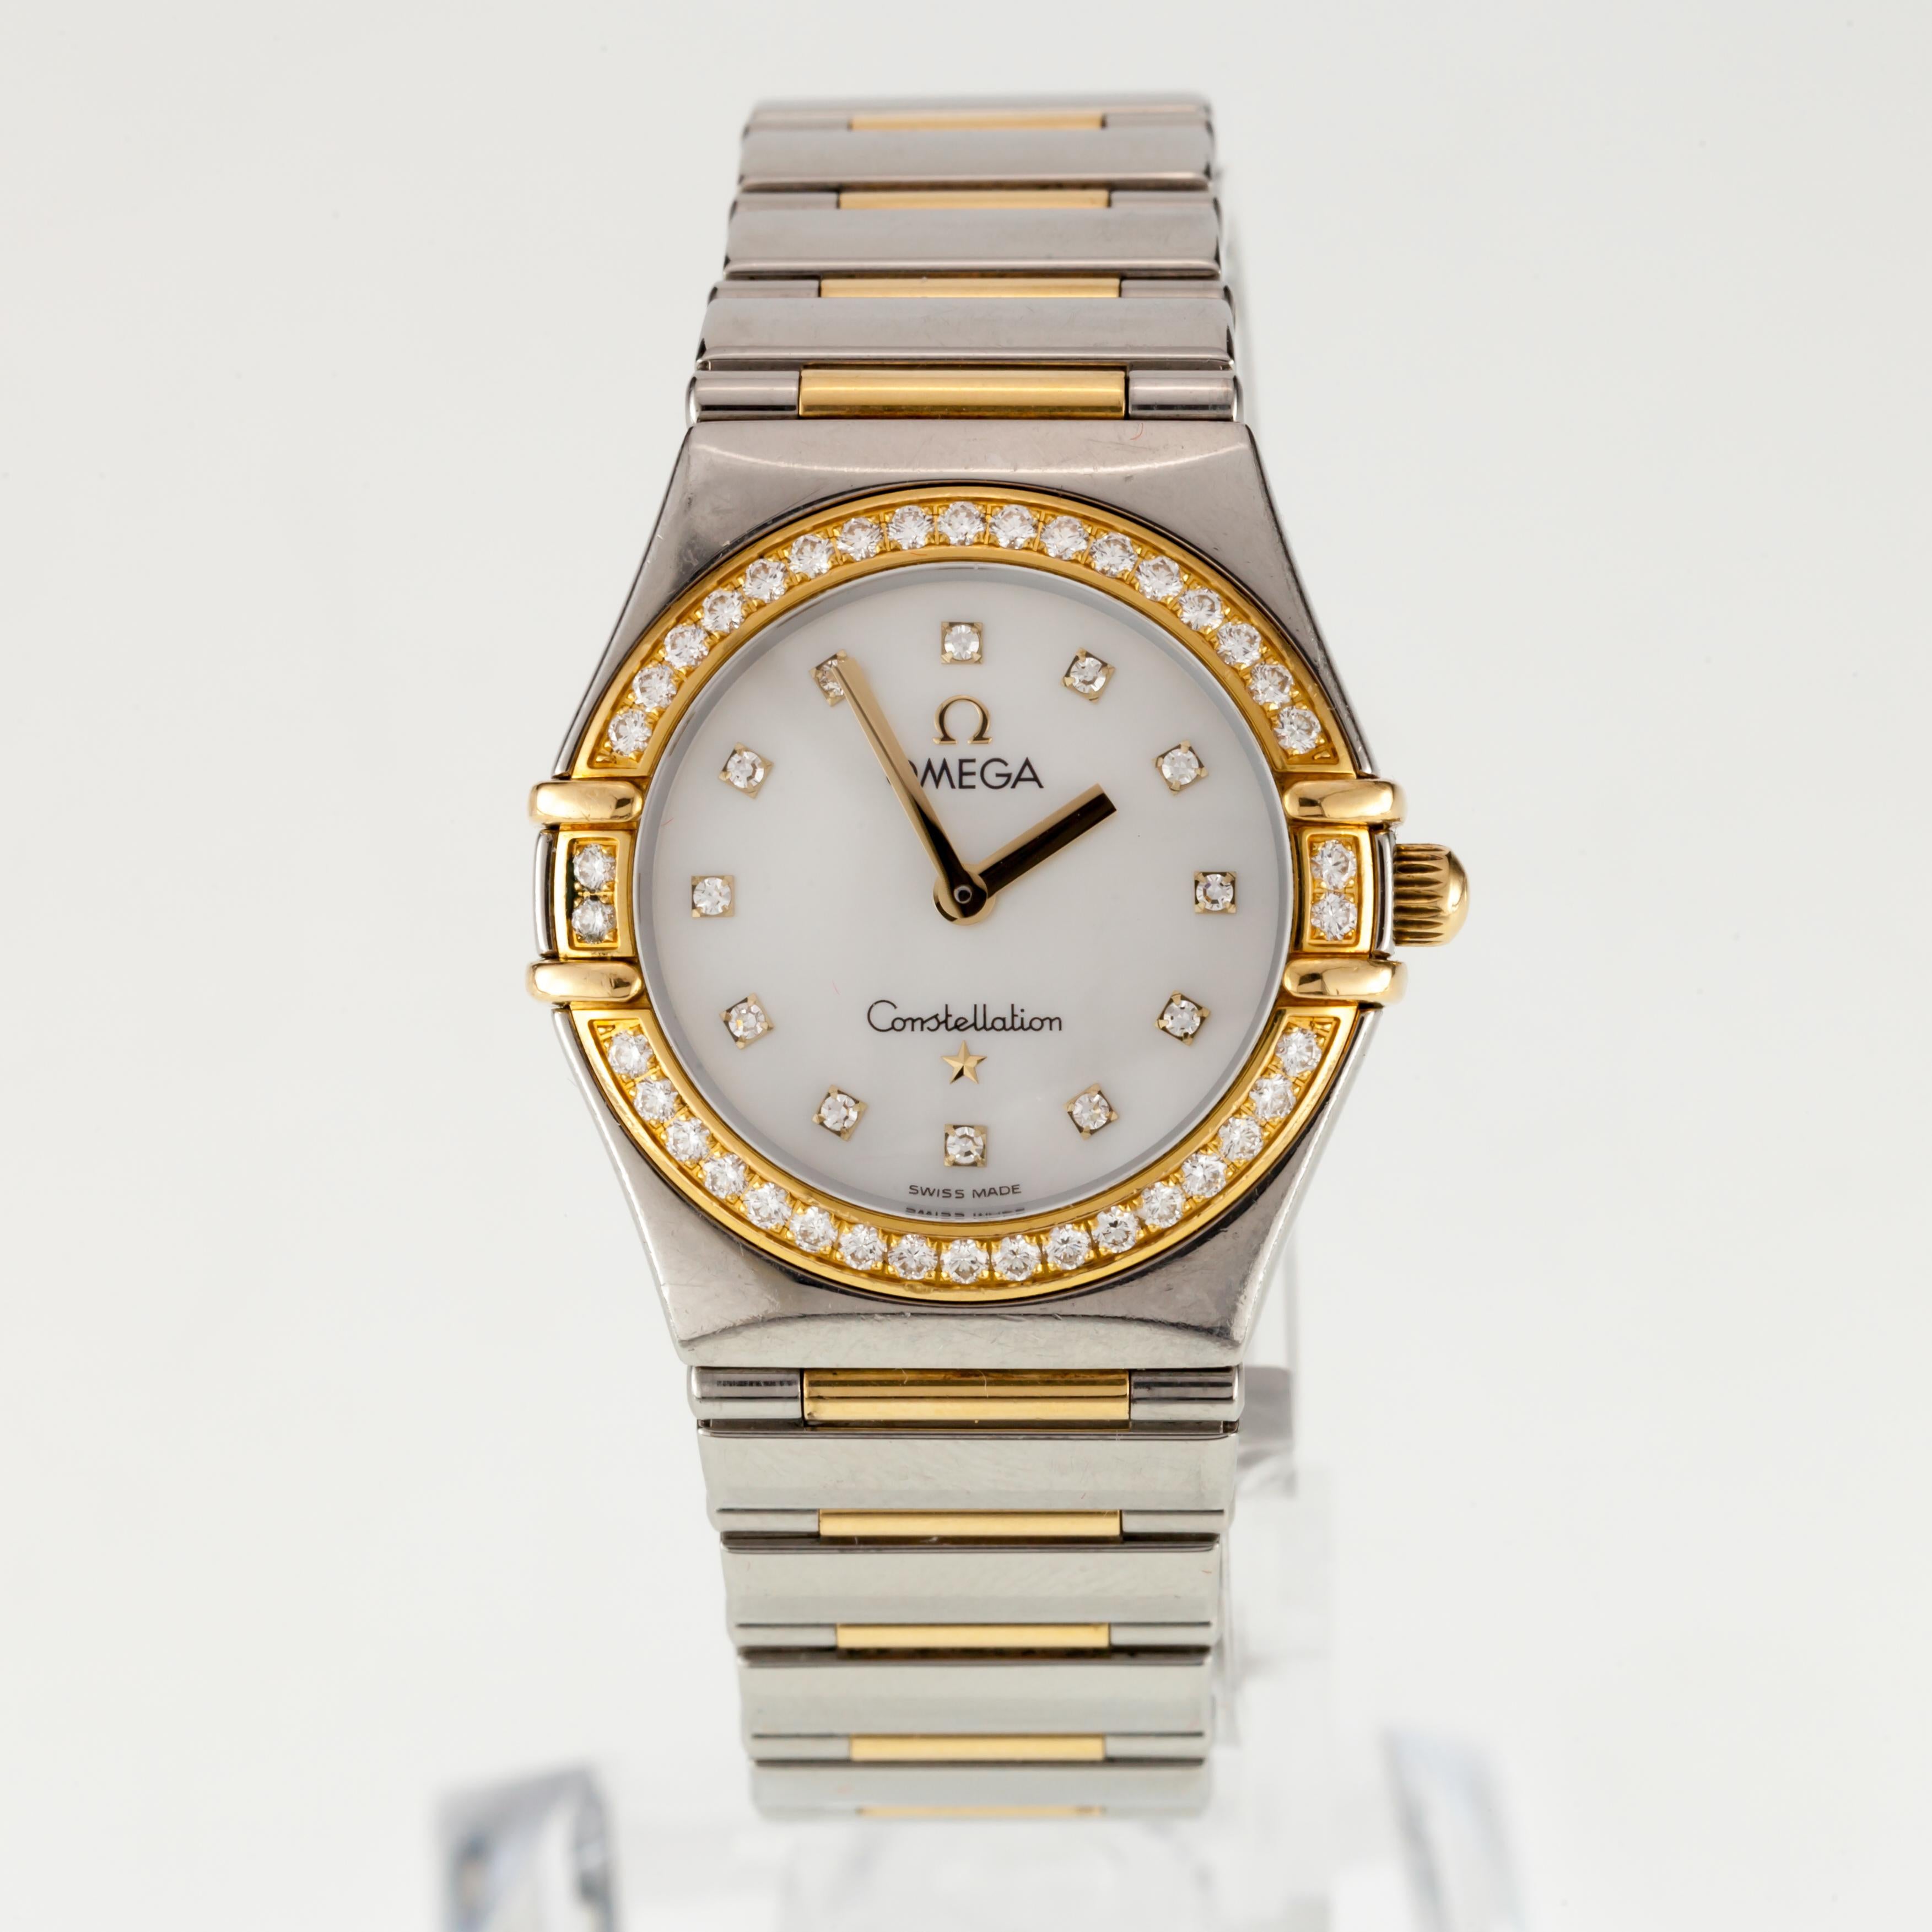 Omega Women's Constellation Quartz Two-Tone Watch MoP Diamond 1376.75 Box/Papers

Model #1376.75
Movement Serial #1373675XX
Movement #1456
Case #8951241-588397XX

Stainless Steel, 18k Yellow Gold, and Diamond Case
25 mm in Diameter
Lug-to-Lug